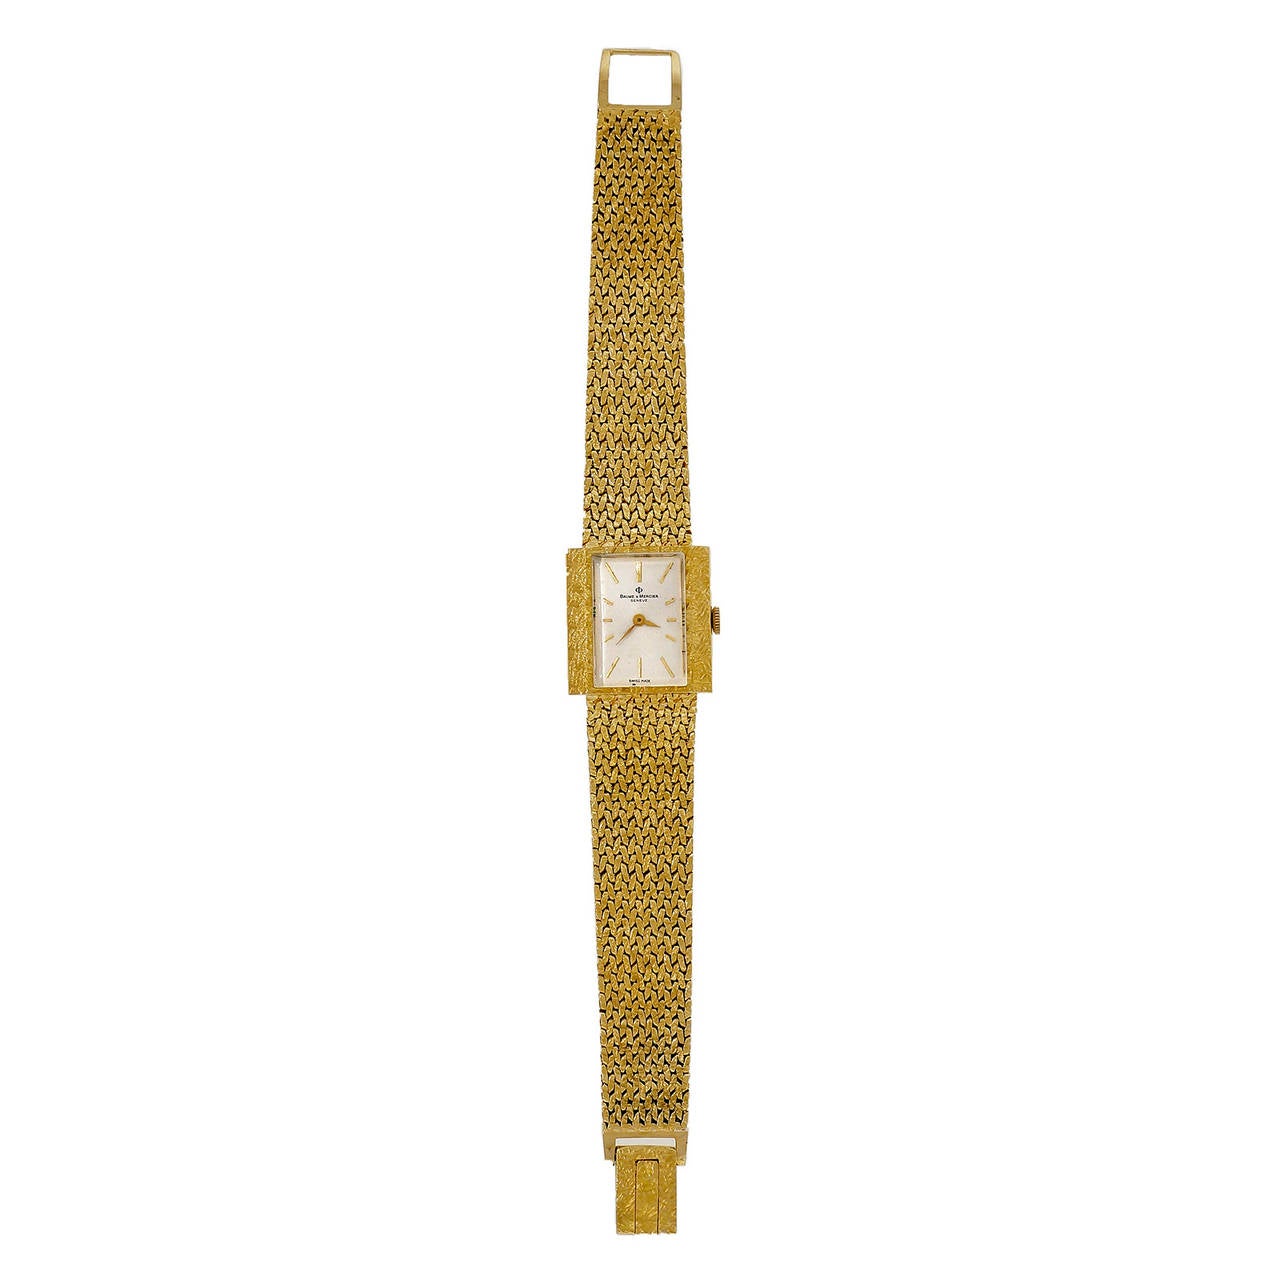 Rare extra fine 1950-1960 Baume & Mercier 18k yellow gold handmade mesh watch with matching band and handmade catch with double fold over safety. Exceptional condition for its age. Original dial. Very good looking with case edges that match the